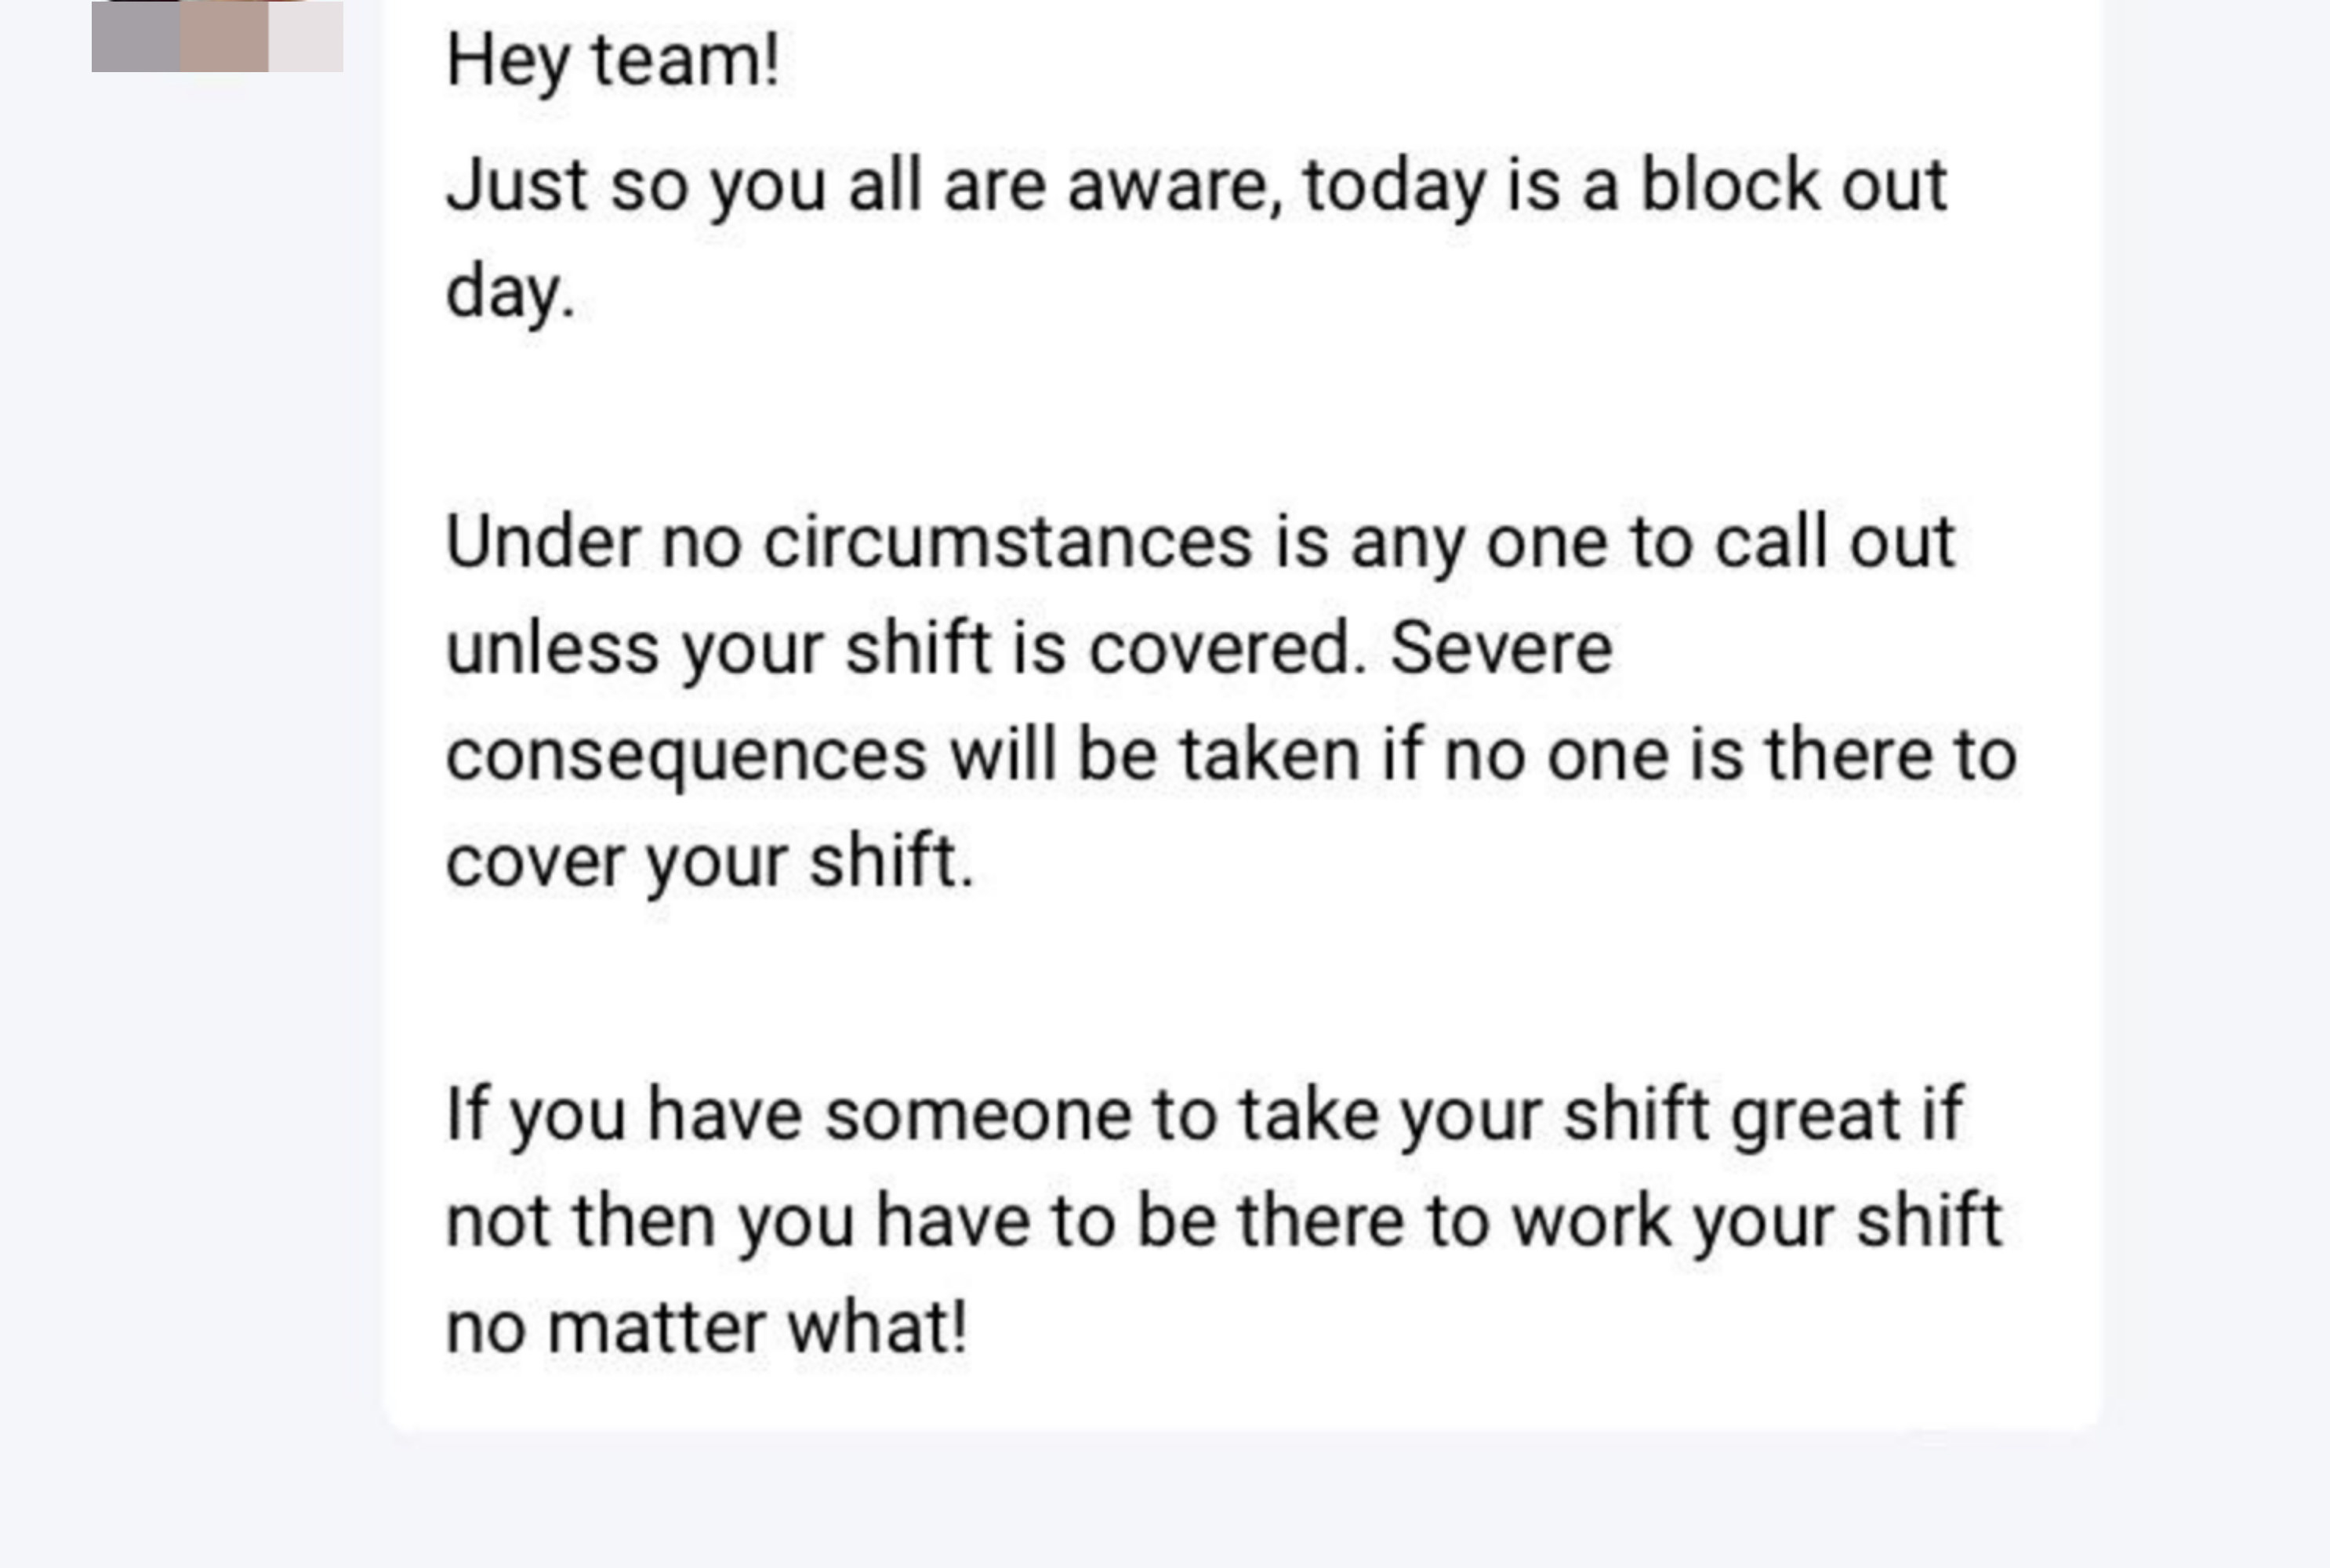 A boss saying there will be severe consequences for people who call out of work.